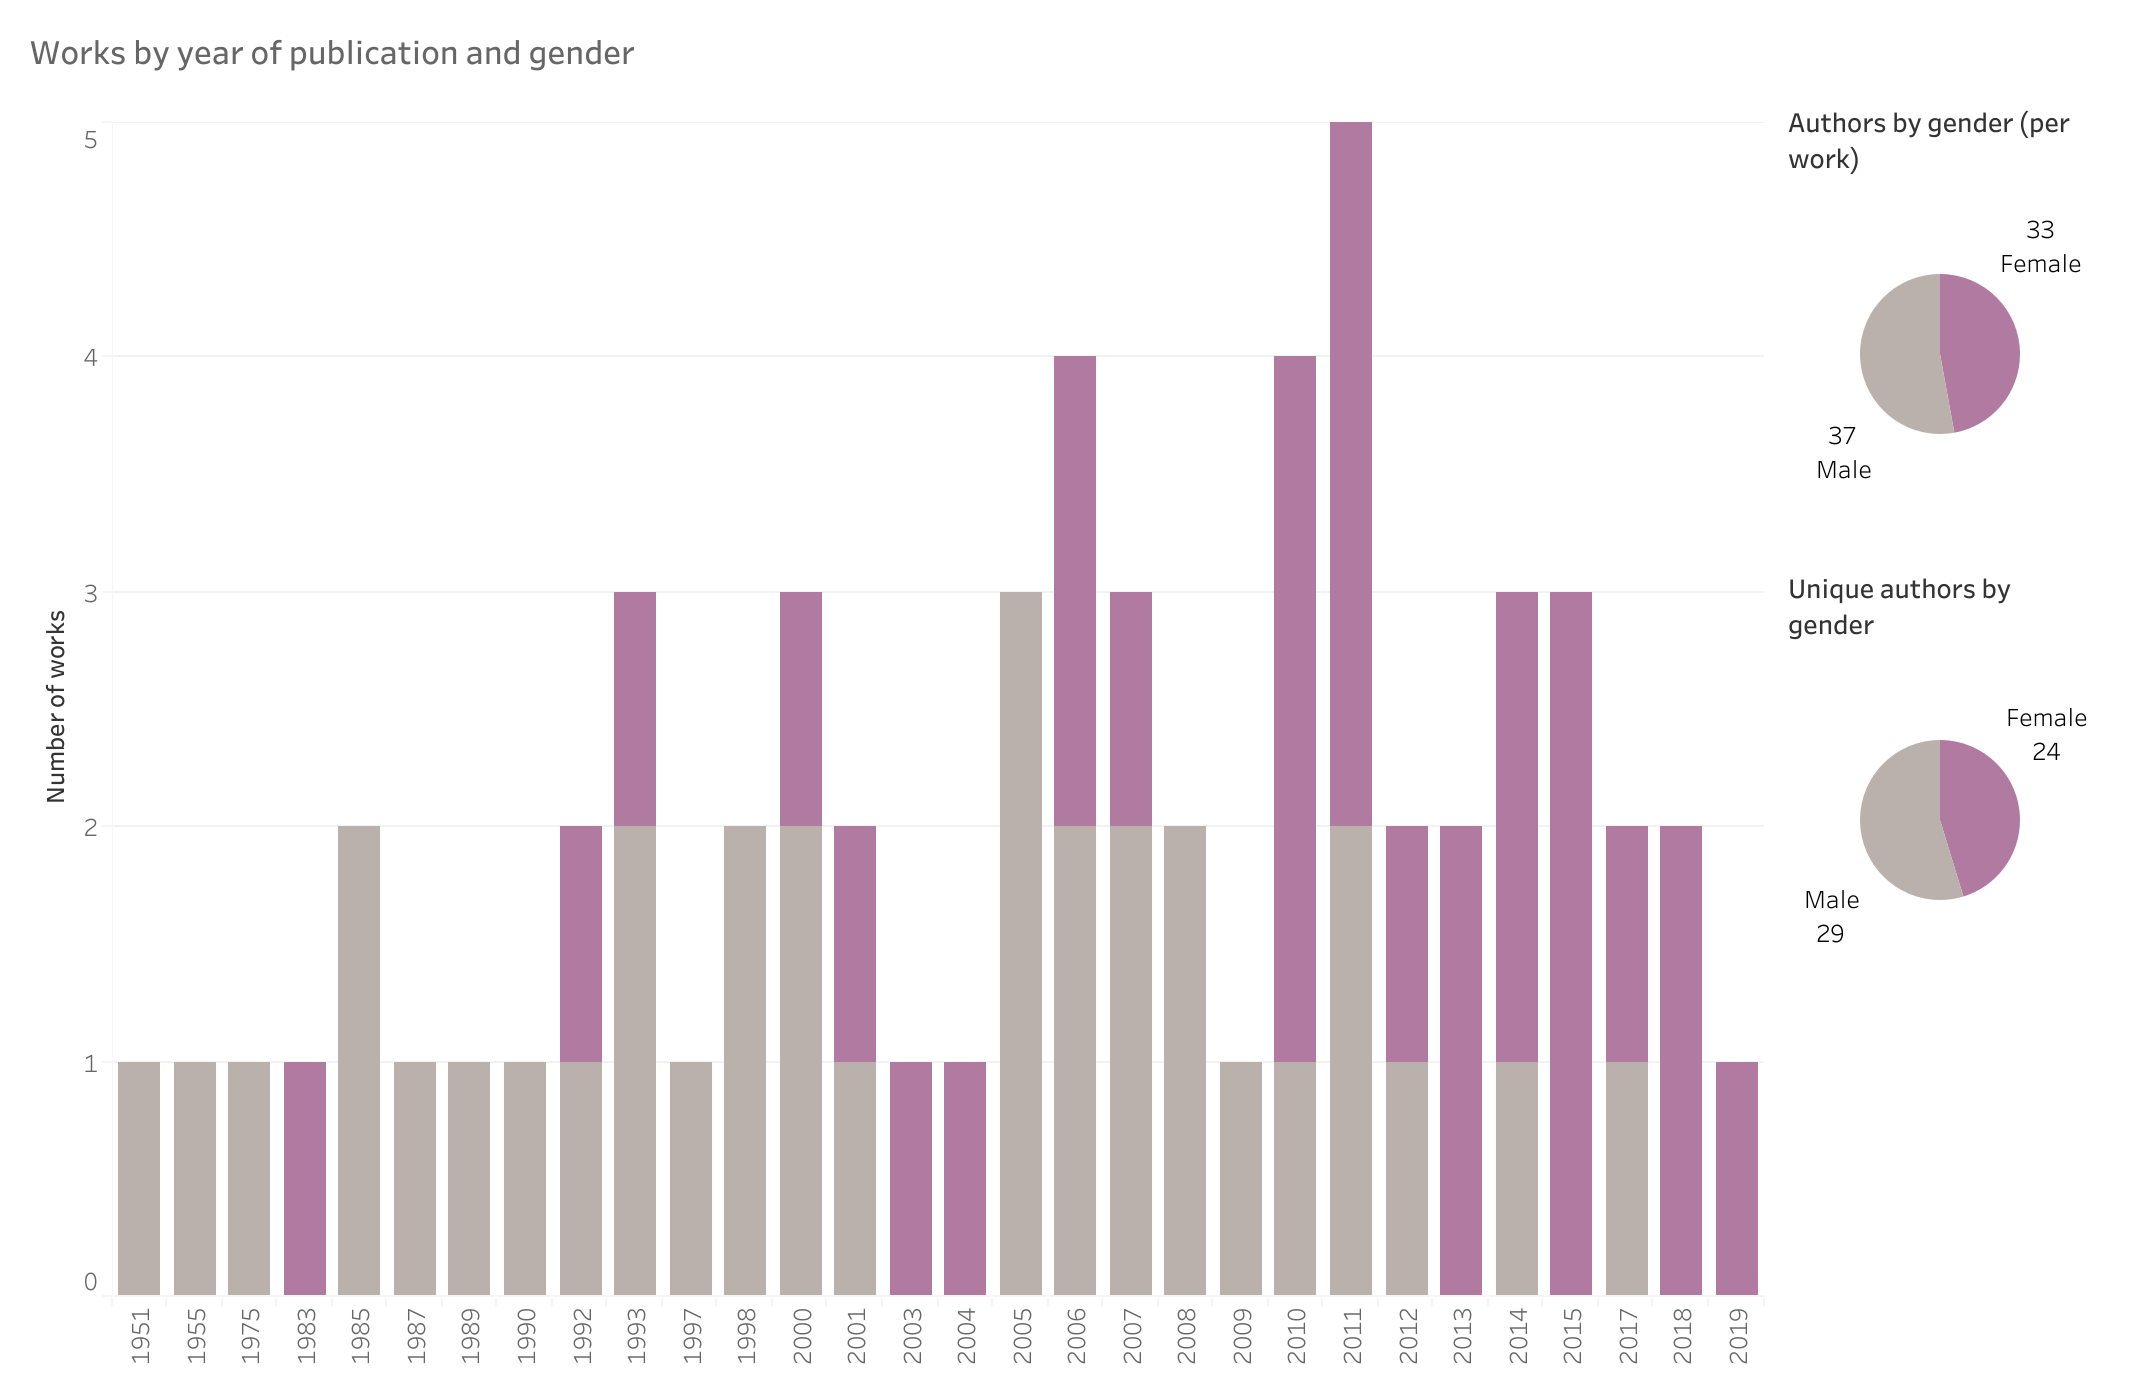 Chart of works by year and gender